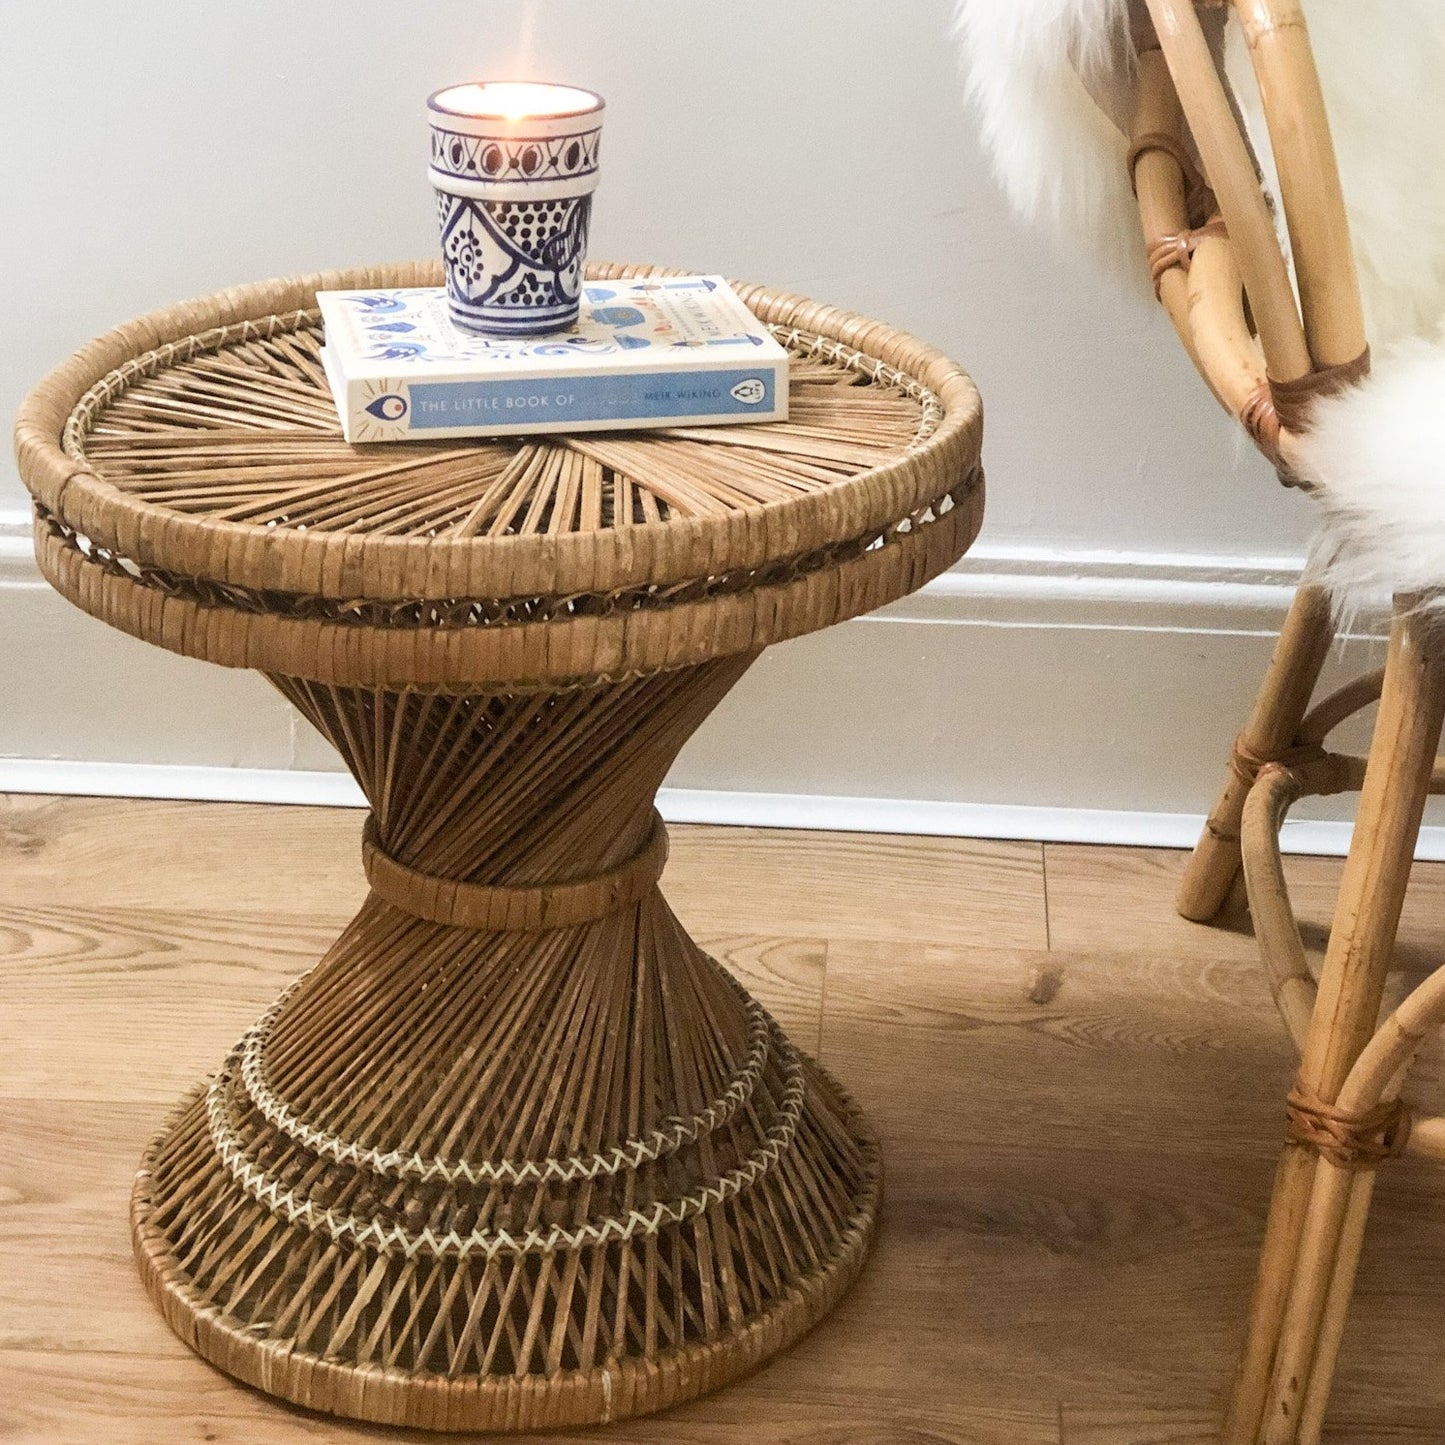 VINTAGE 1970s RATTAN PLANT STAND / SIDE TABLE